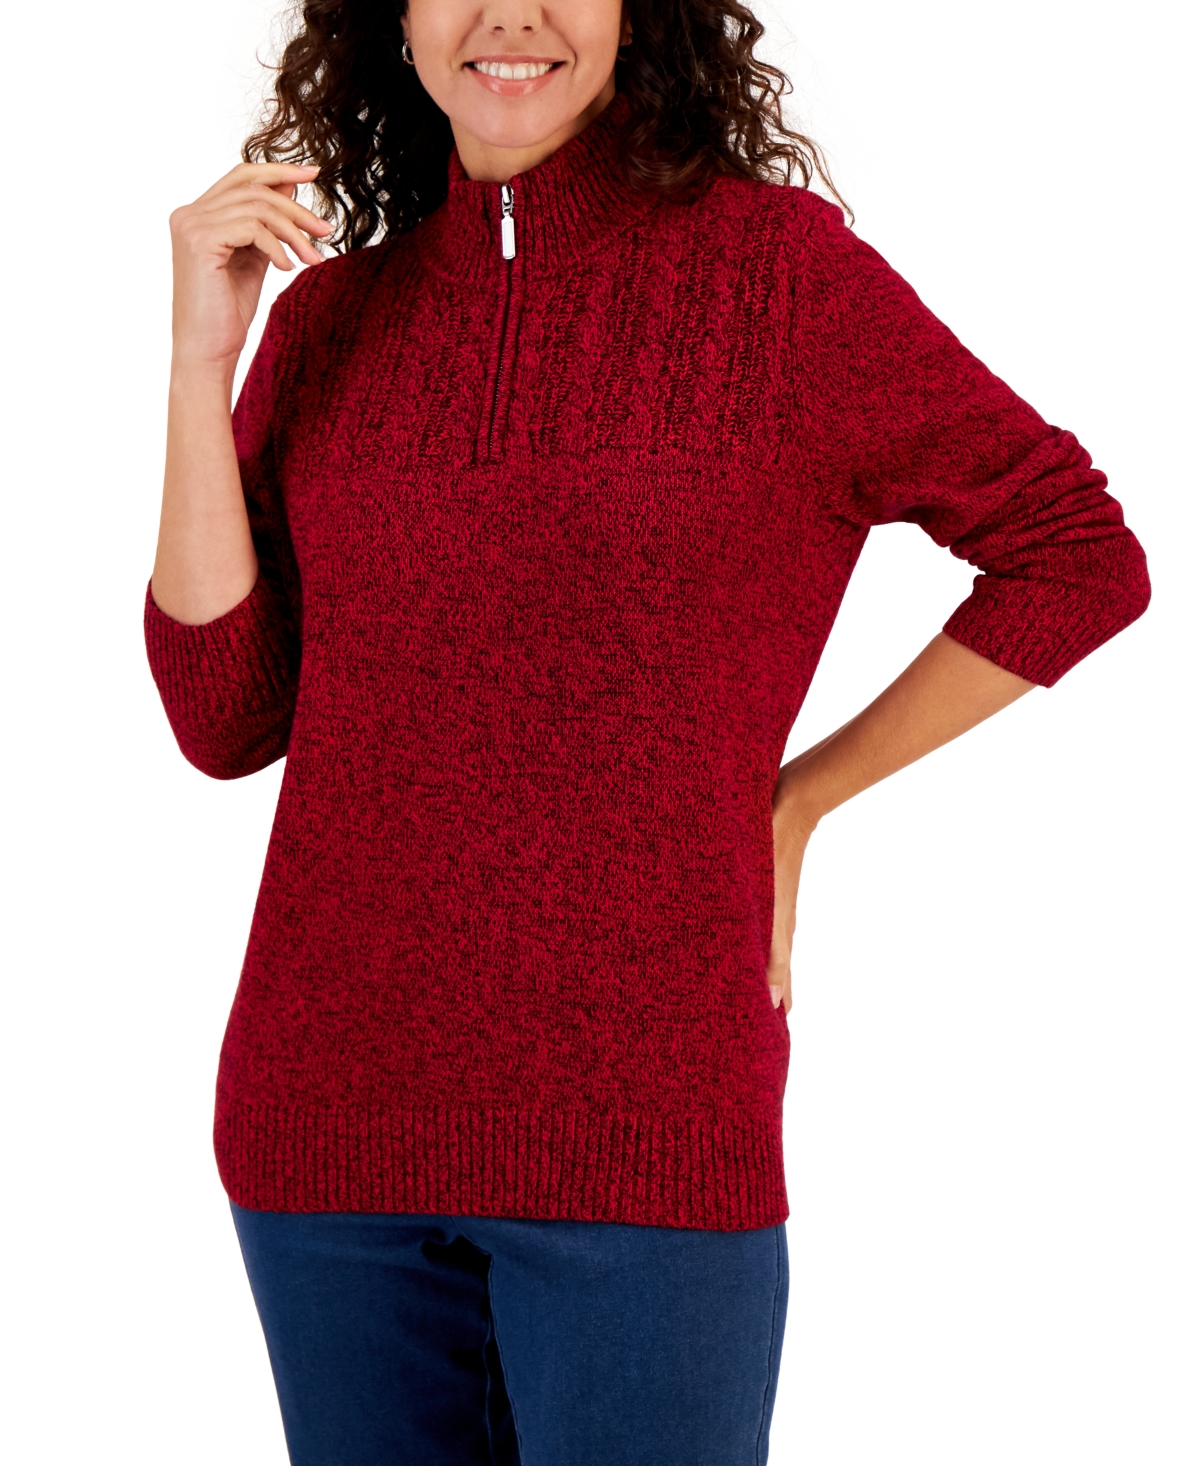 Women's Cotton Quarter-Zip Sweater, Created for Macy's - New Red Amore Marl